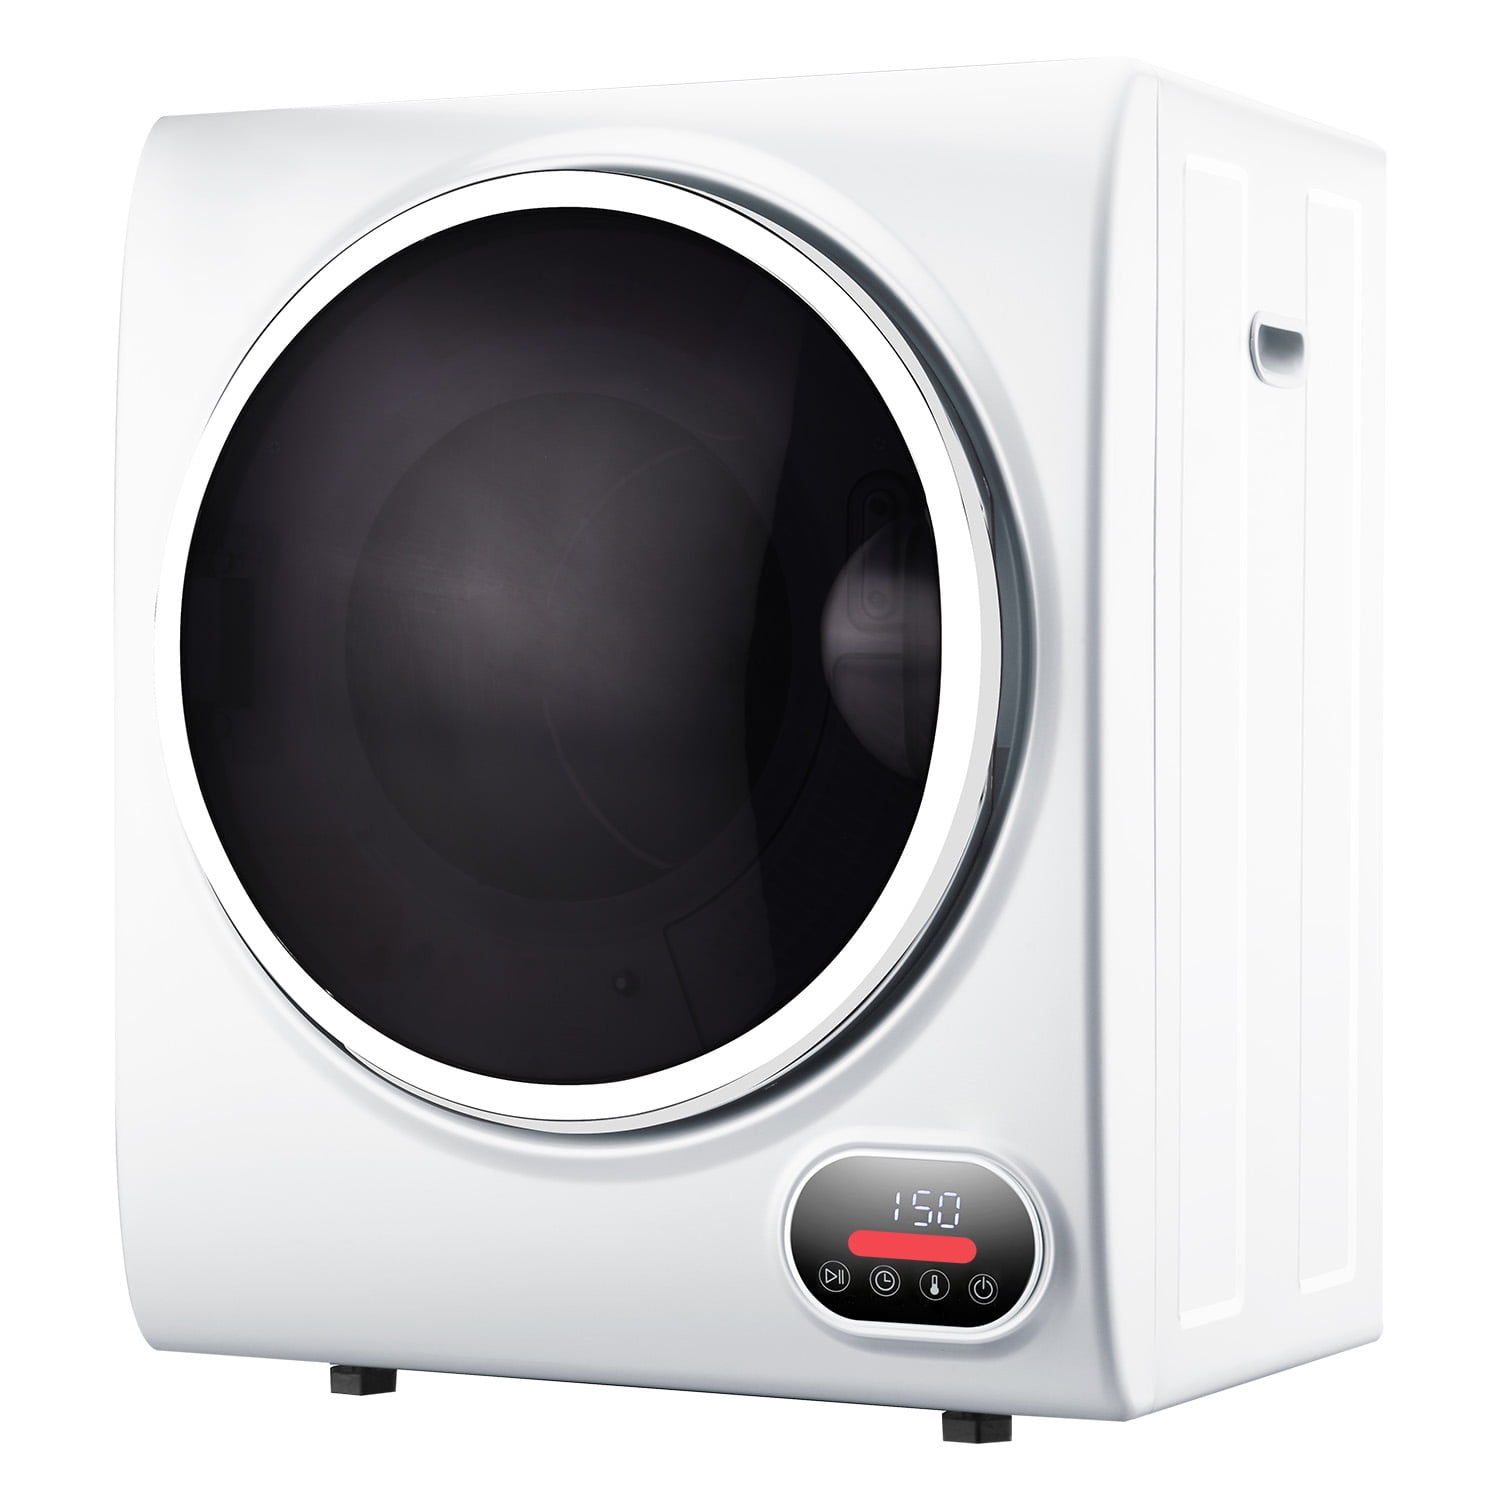 Simzlife 1.6 Cu. Ft. Compact Dryer Electric Dryers Machine for Apartme